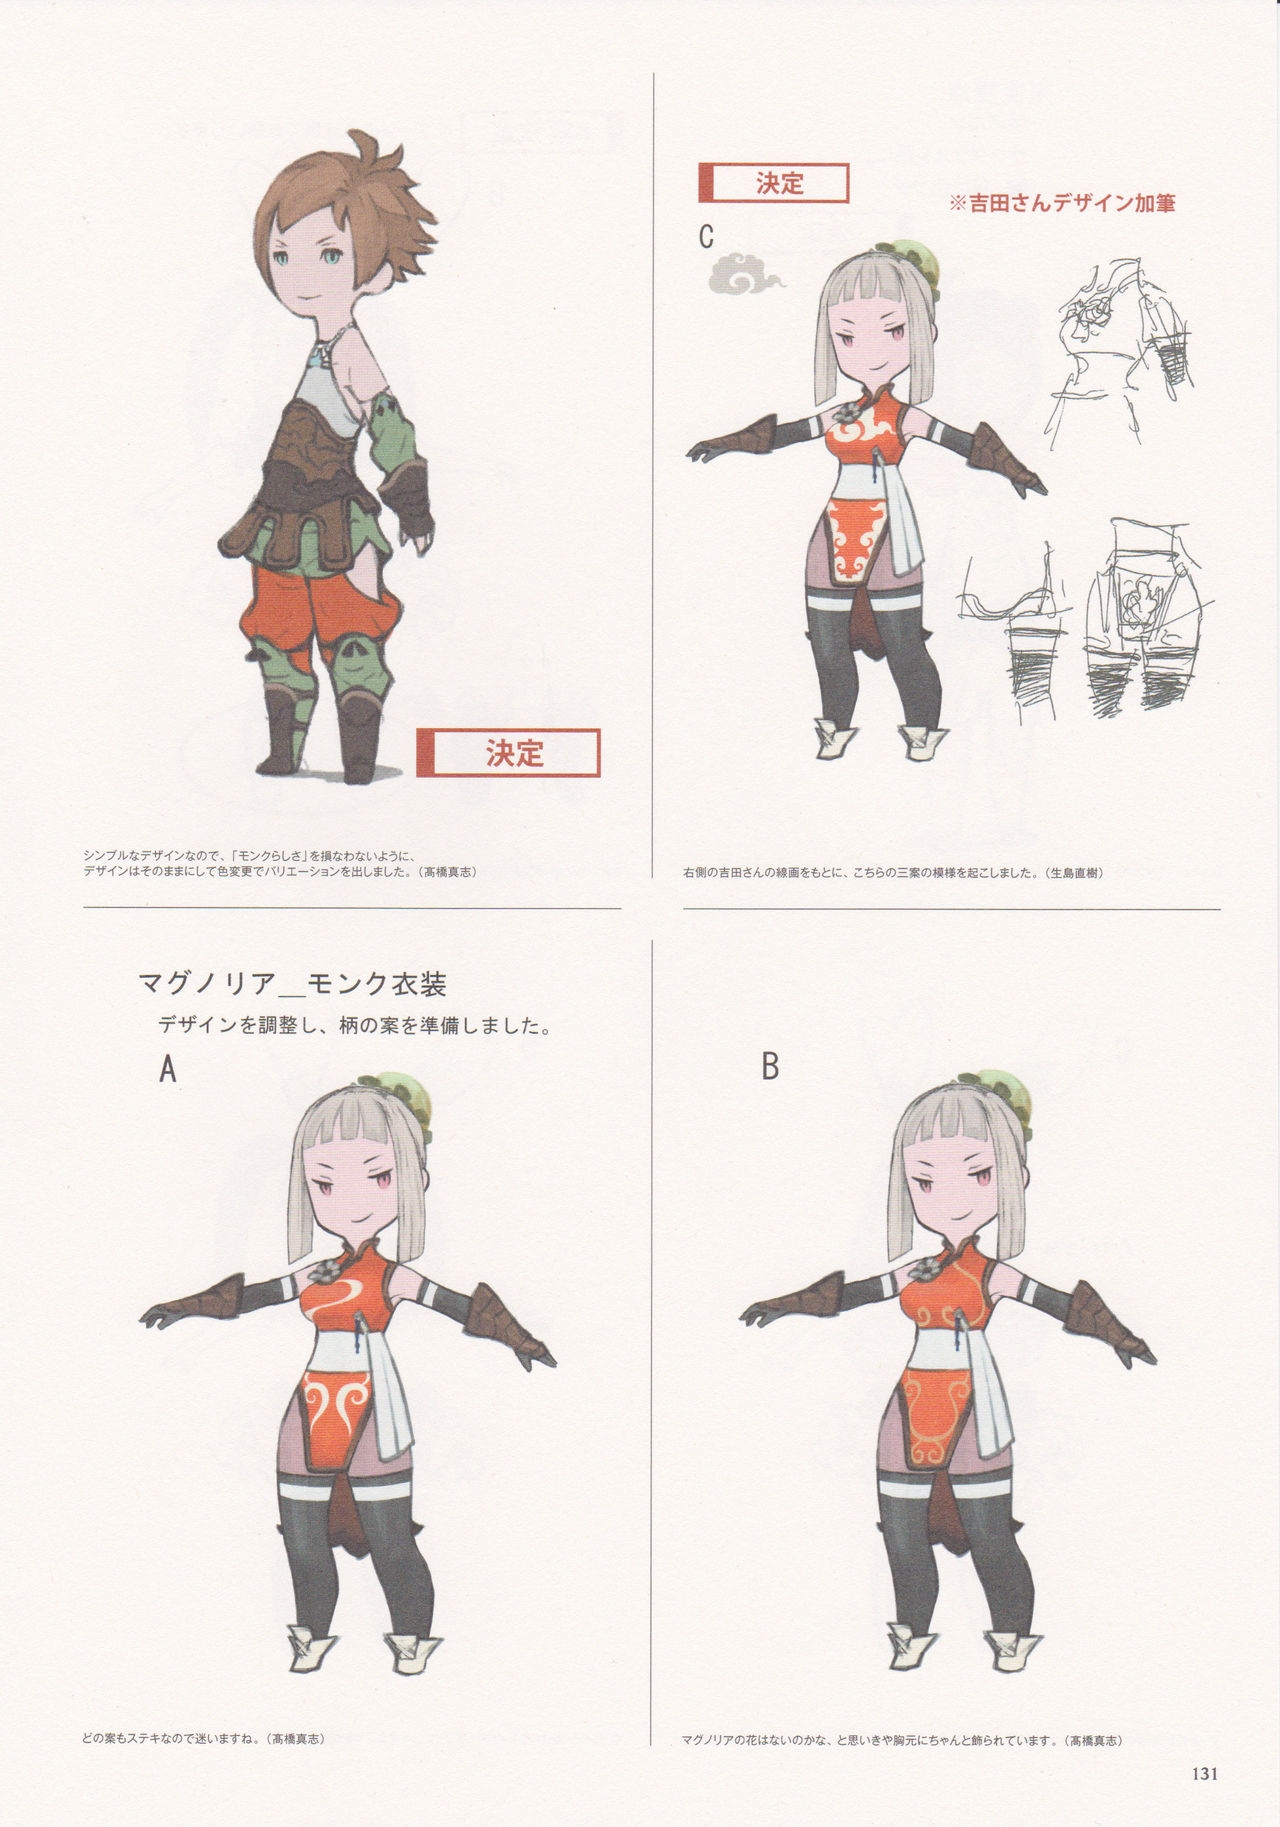 Bravely Second - End Layer - Design Works THE ART OF BRAVELY 2013-2015 131